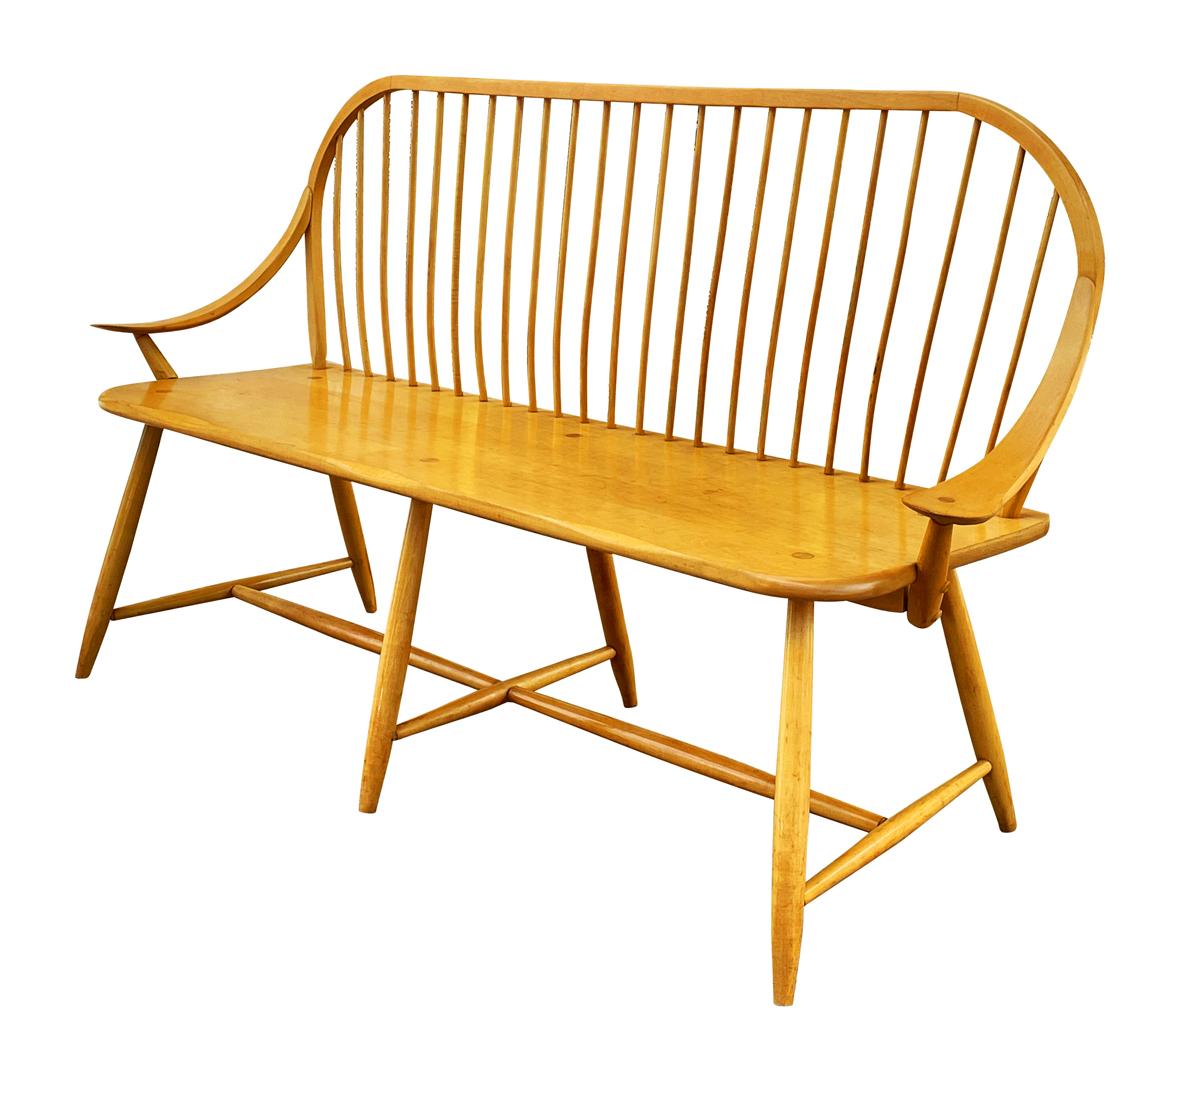 American Midcentury Transitional Modern Spindle Back Bentwood Settee Bench in Maple